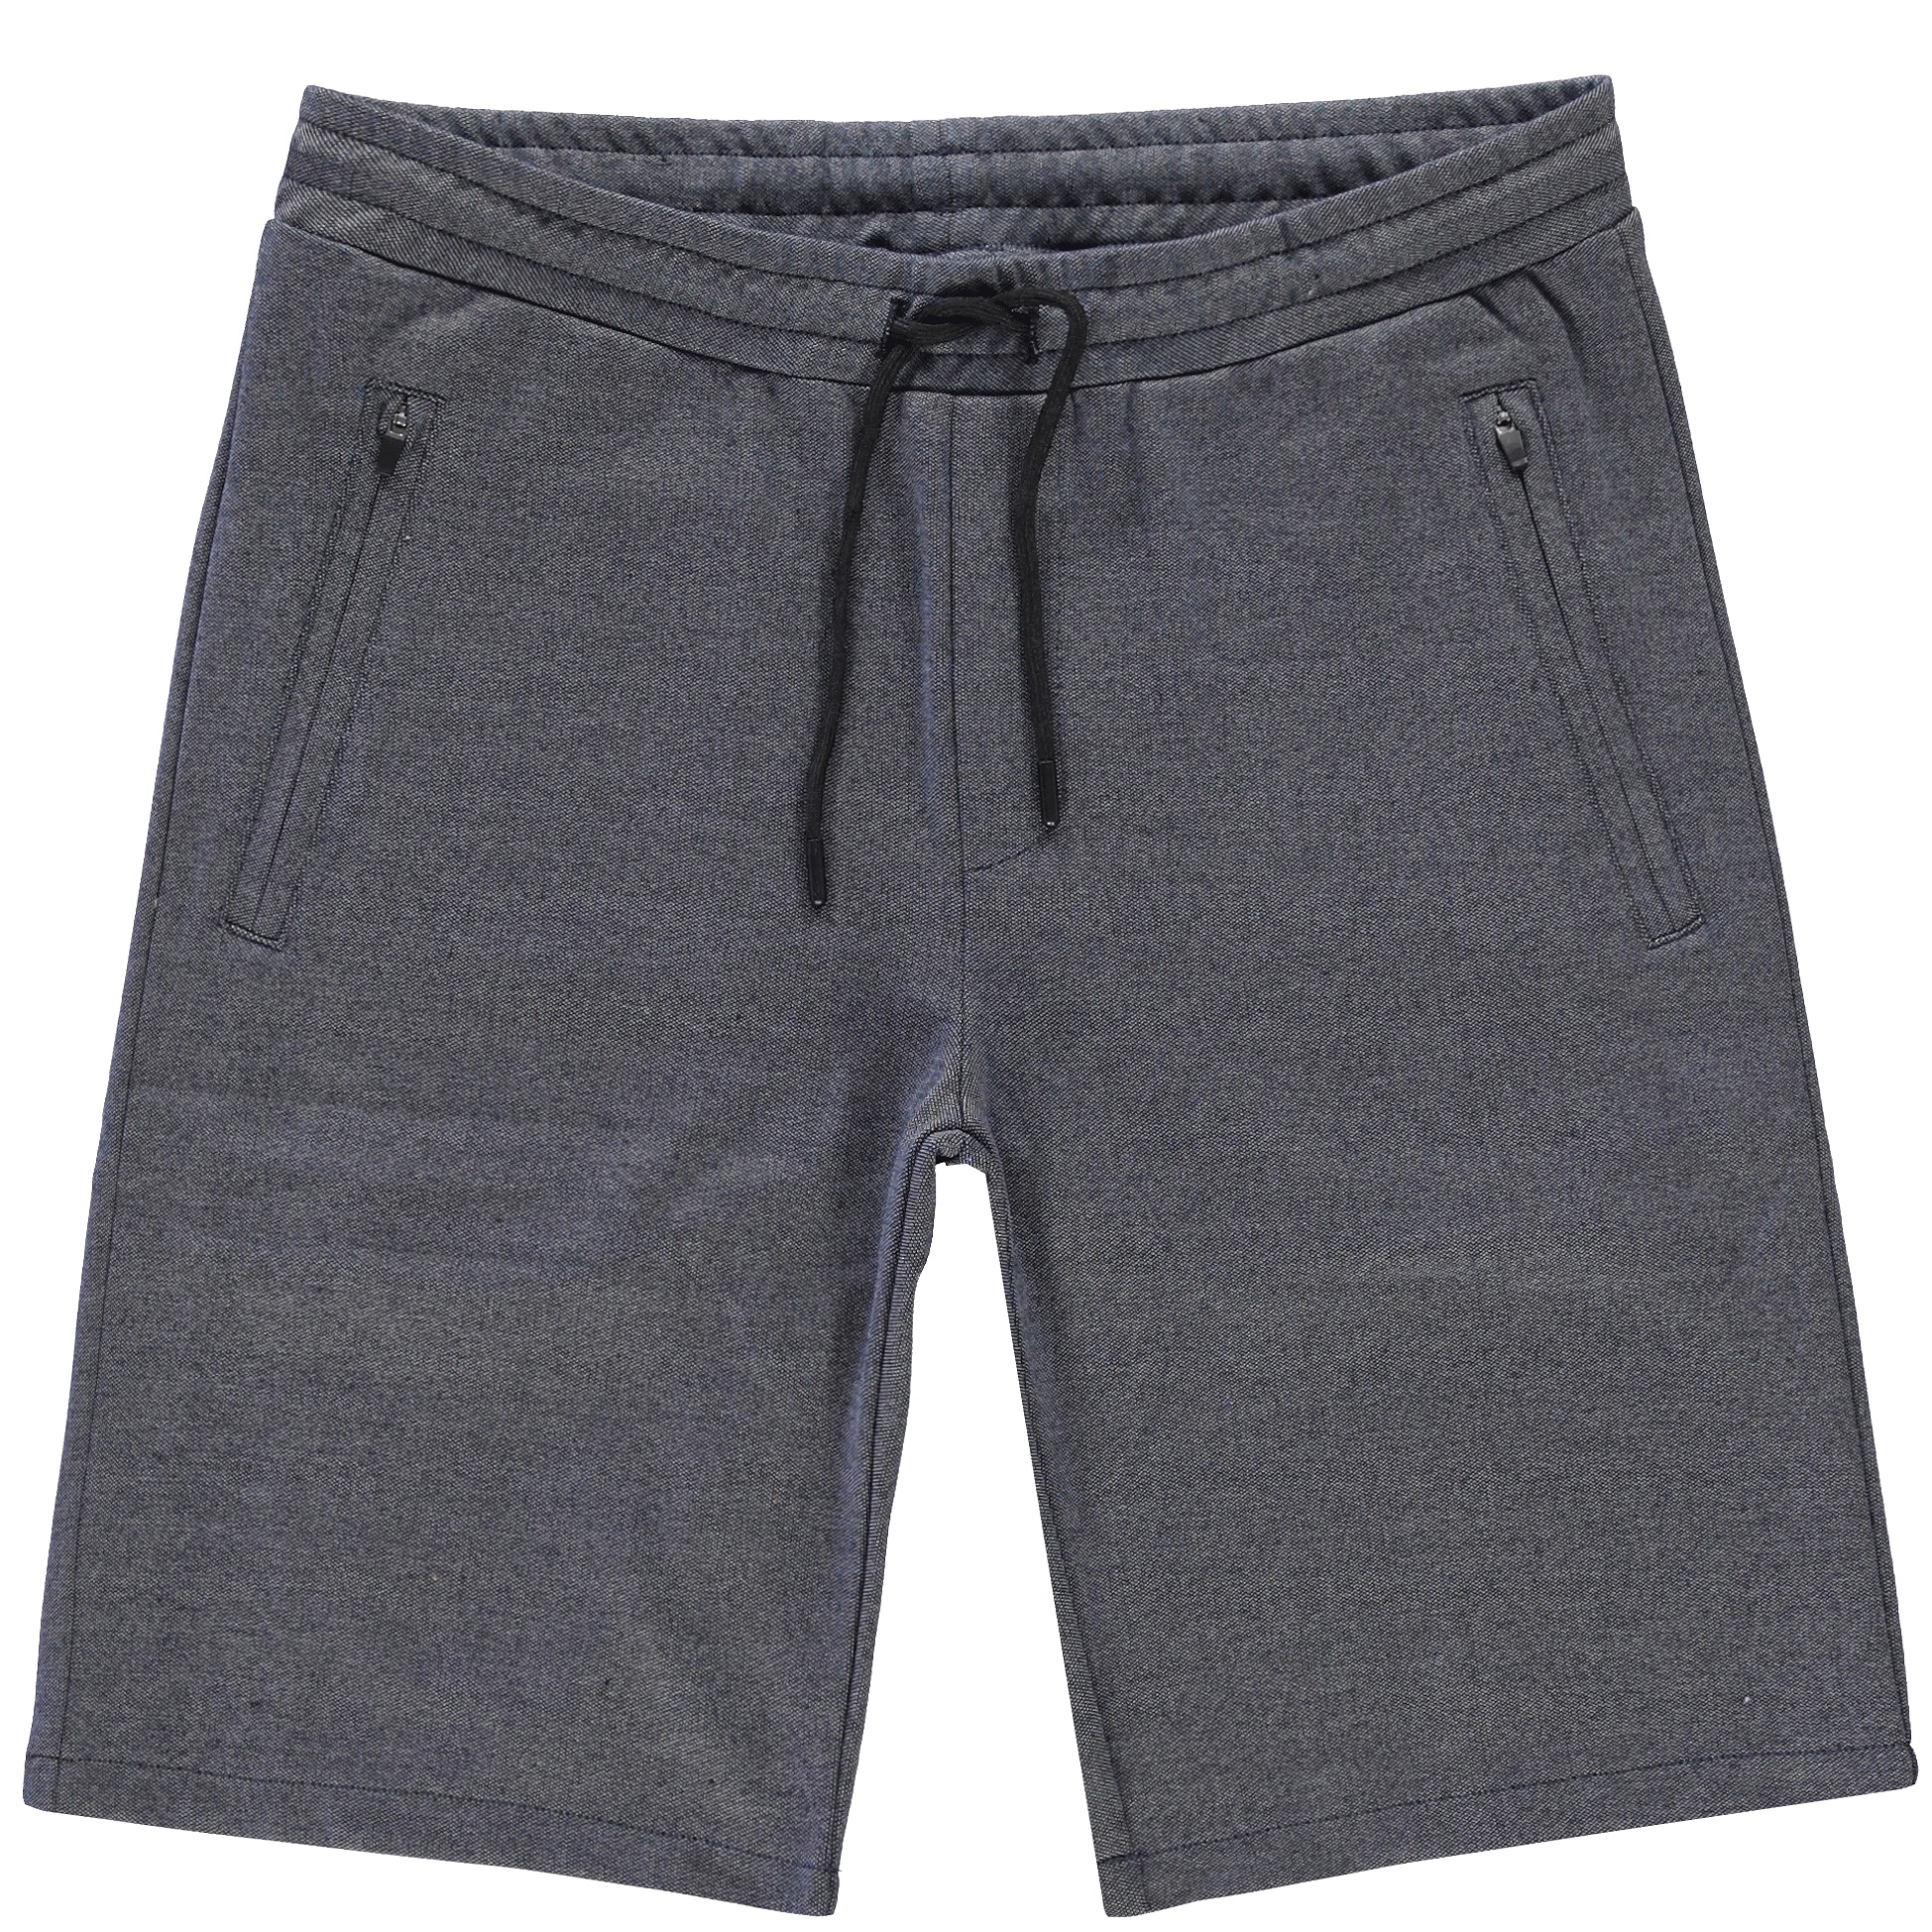 Cars Jeans Herell sw short navy 4819412